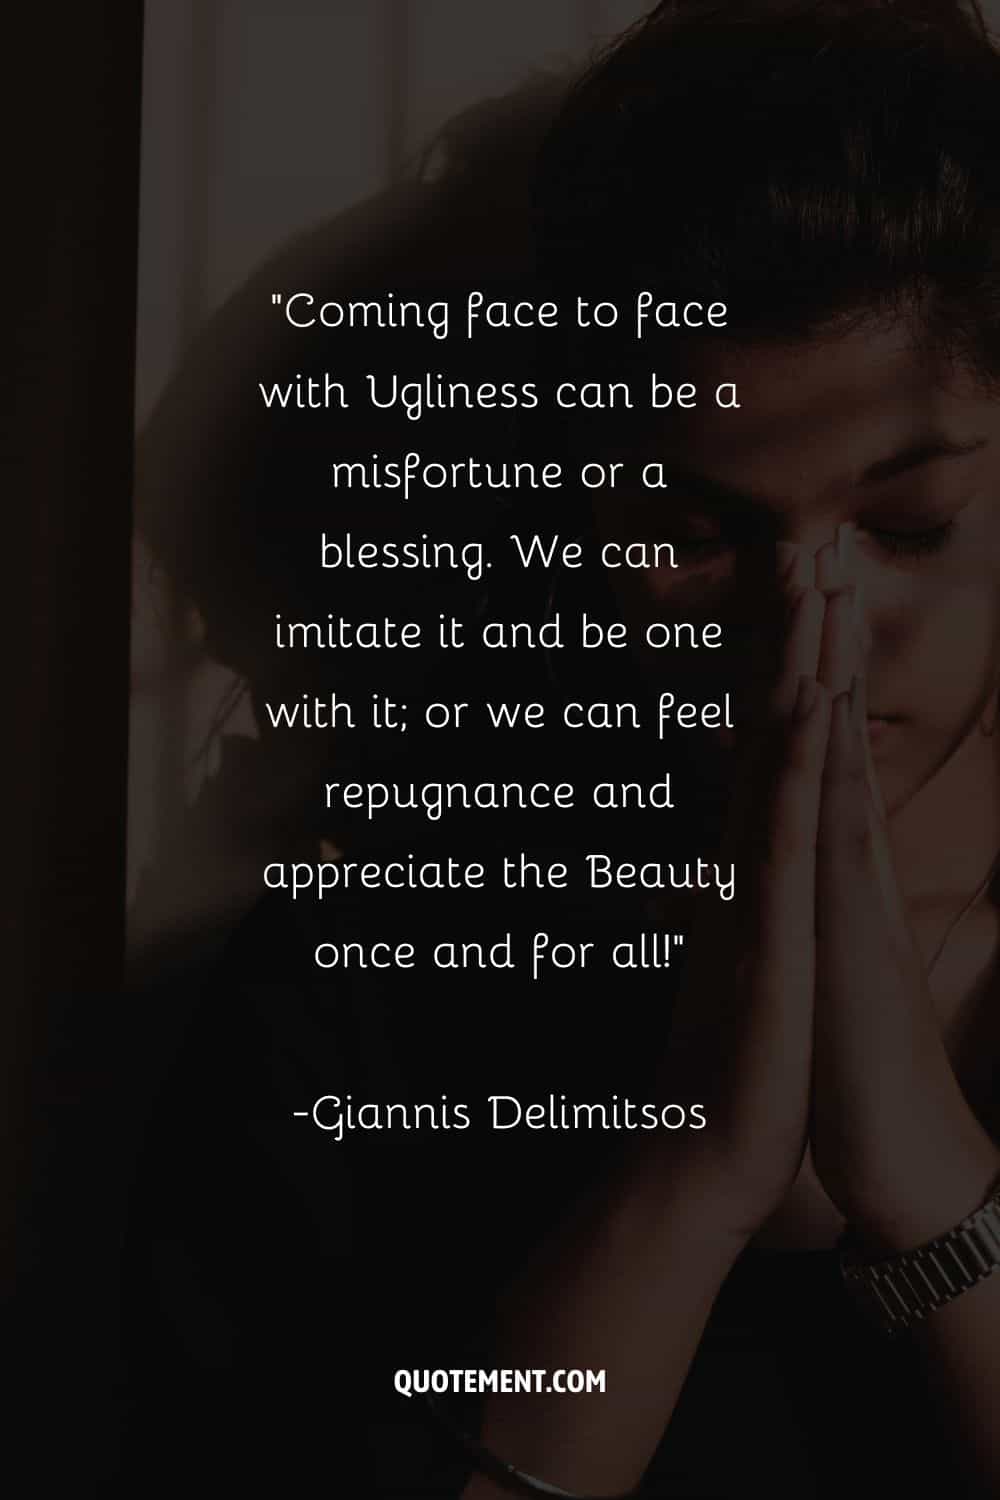 “Coming face to face with Ugliness can be a misfortune or a blessing. We can imitate it and be one with it; or we can feel repugnance and appreciate the Beauty once and for all!”